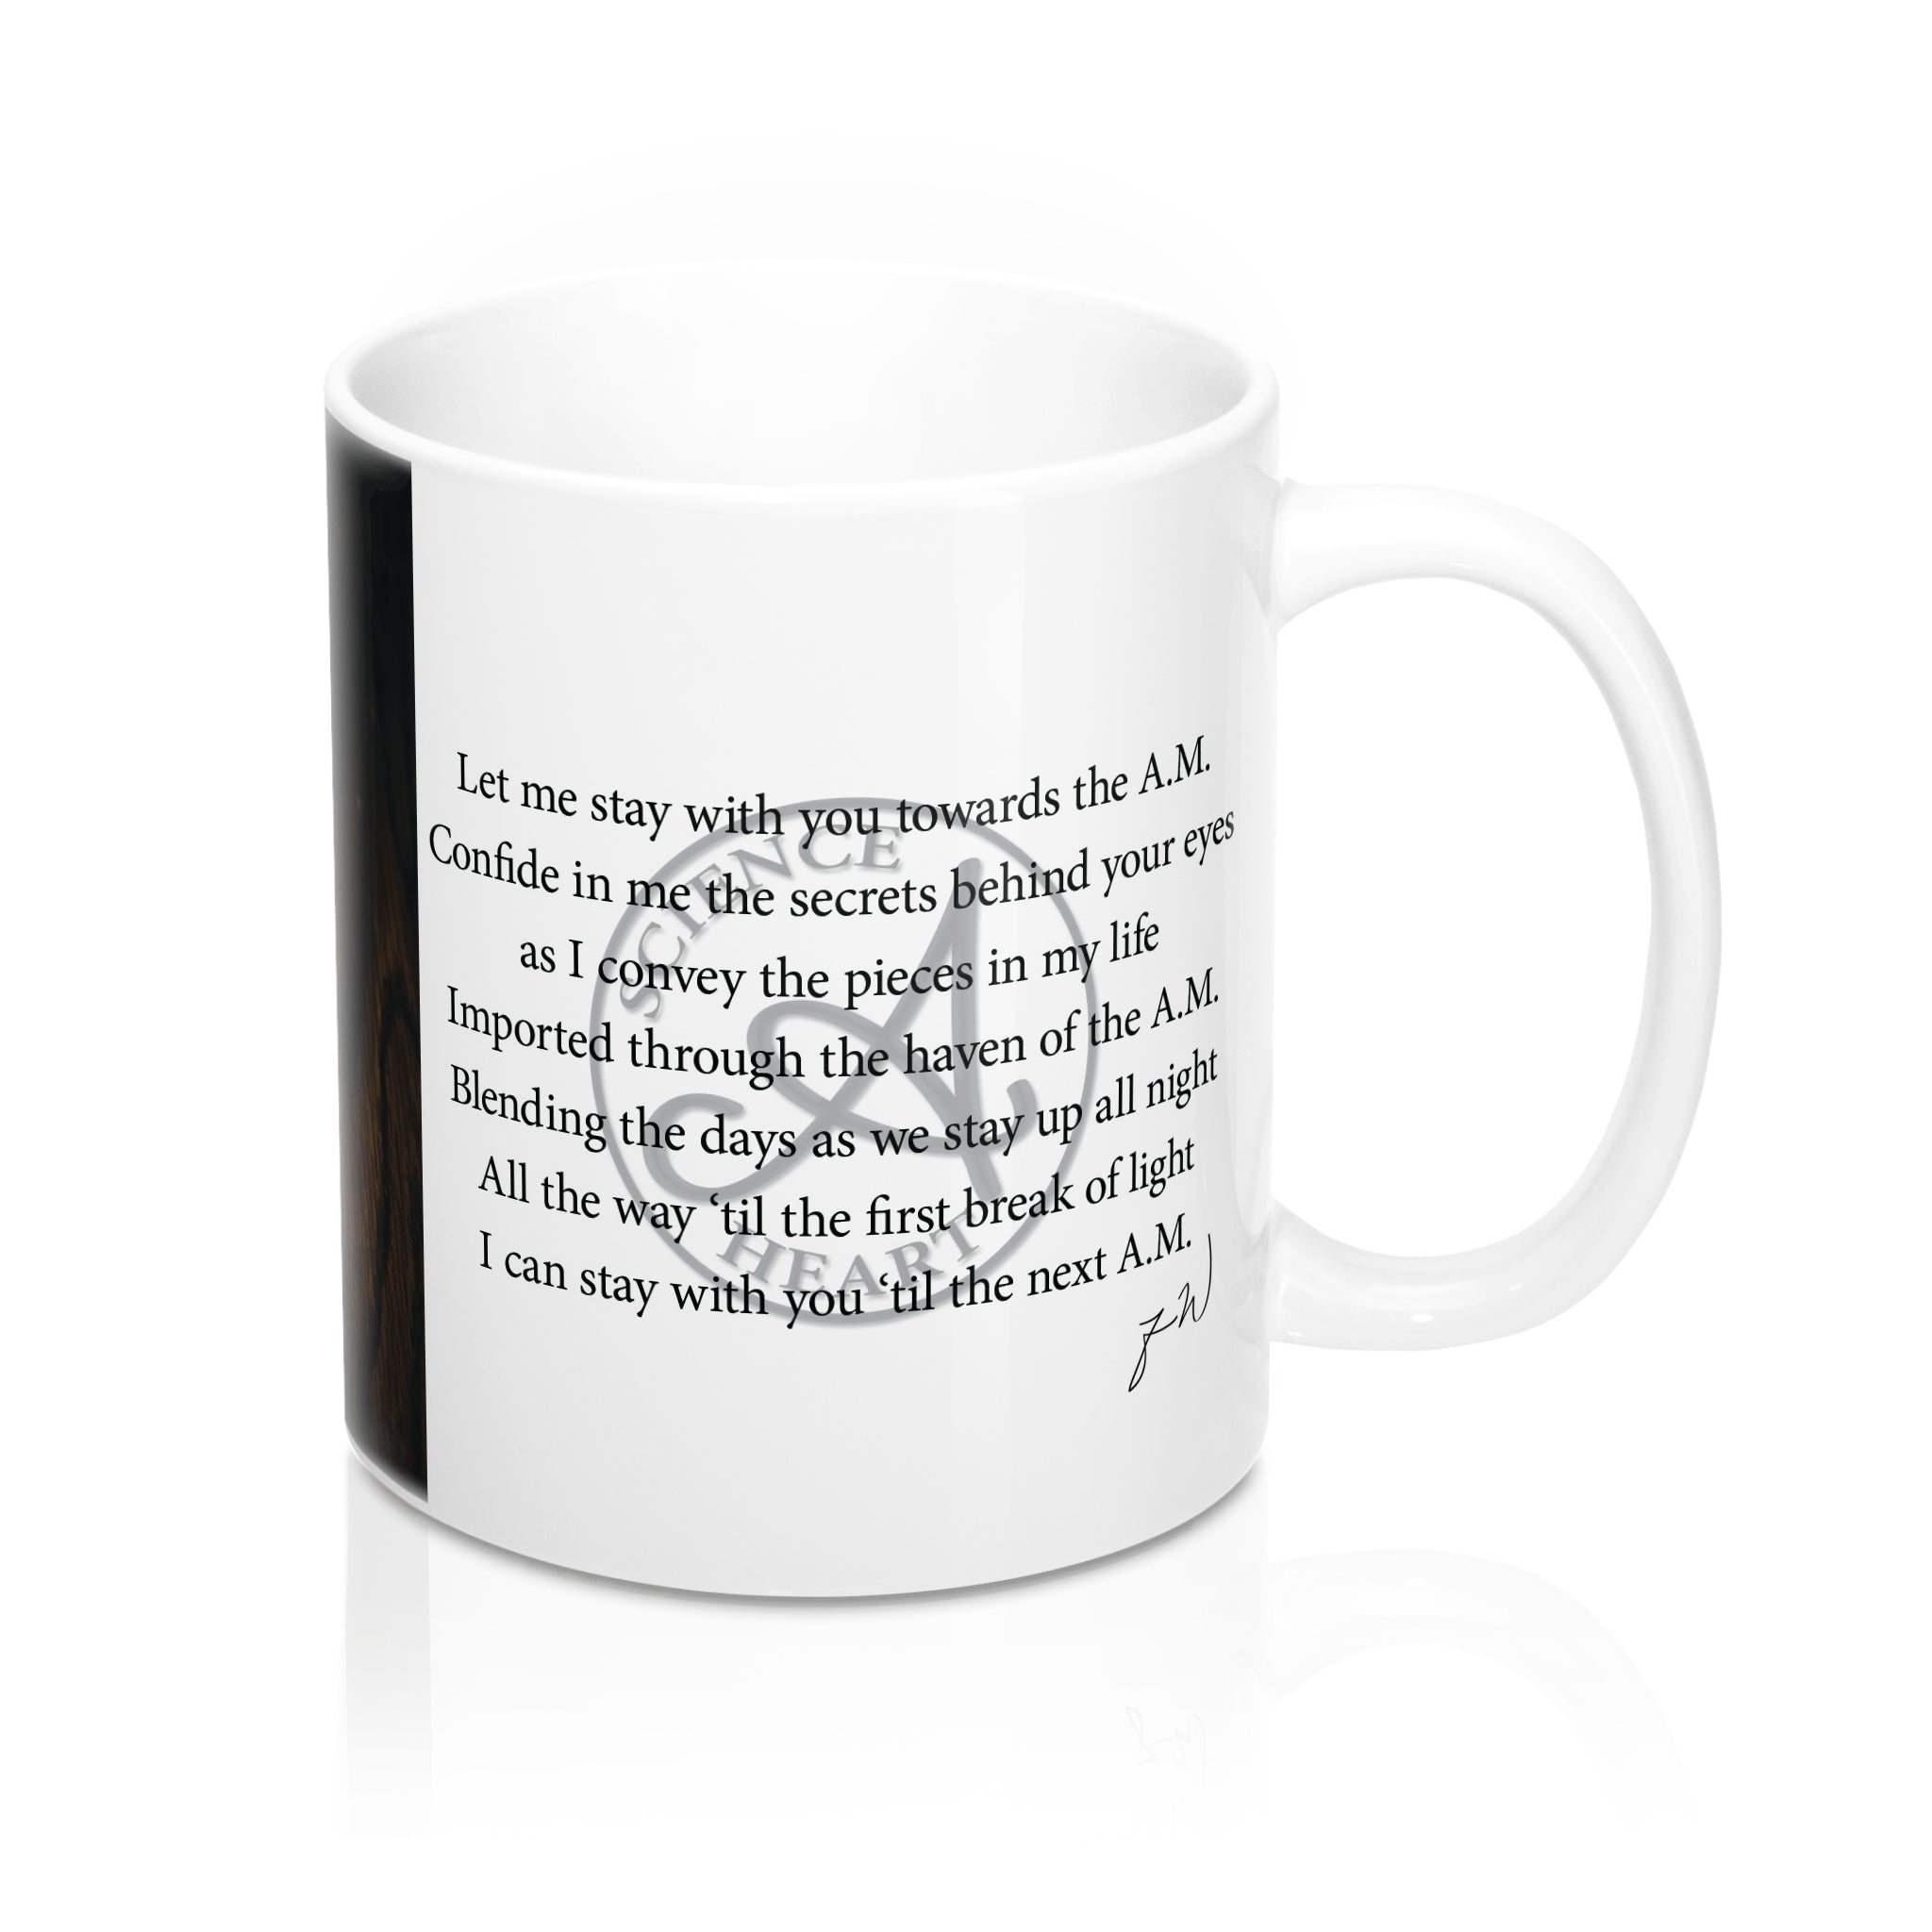 "Let me stay with you towards the A.M." Mug